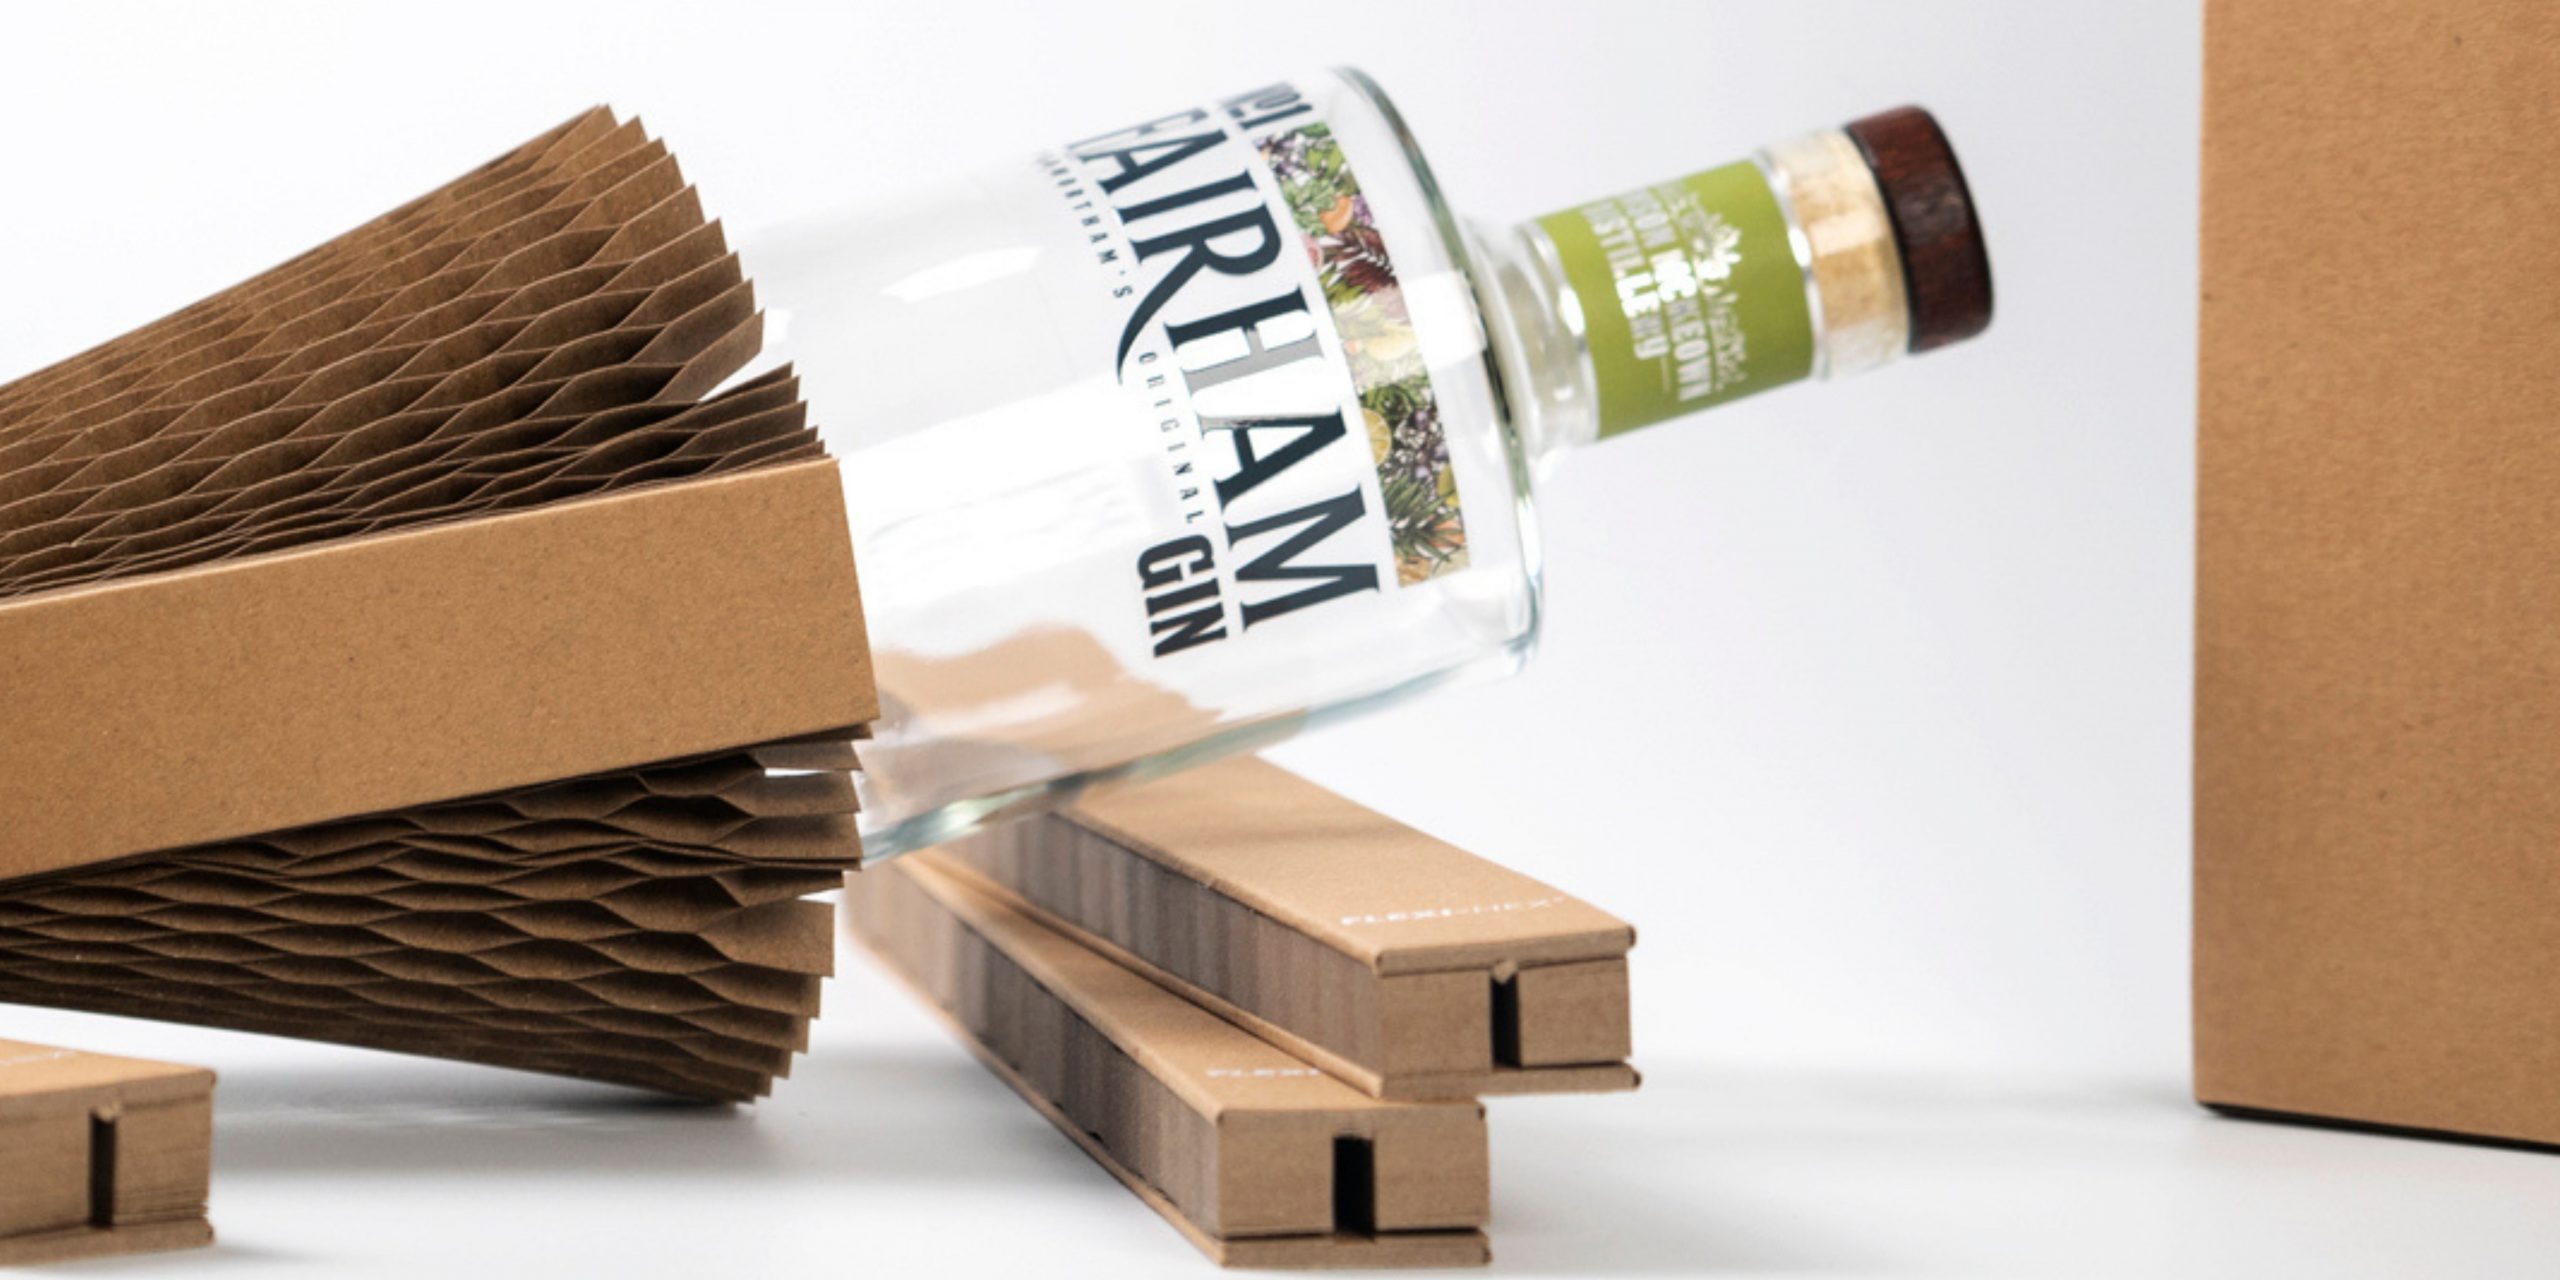 100% plastic free packaging using within craft gin distilling